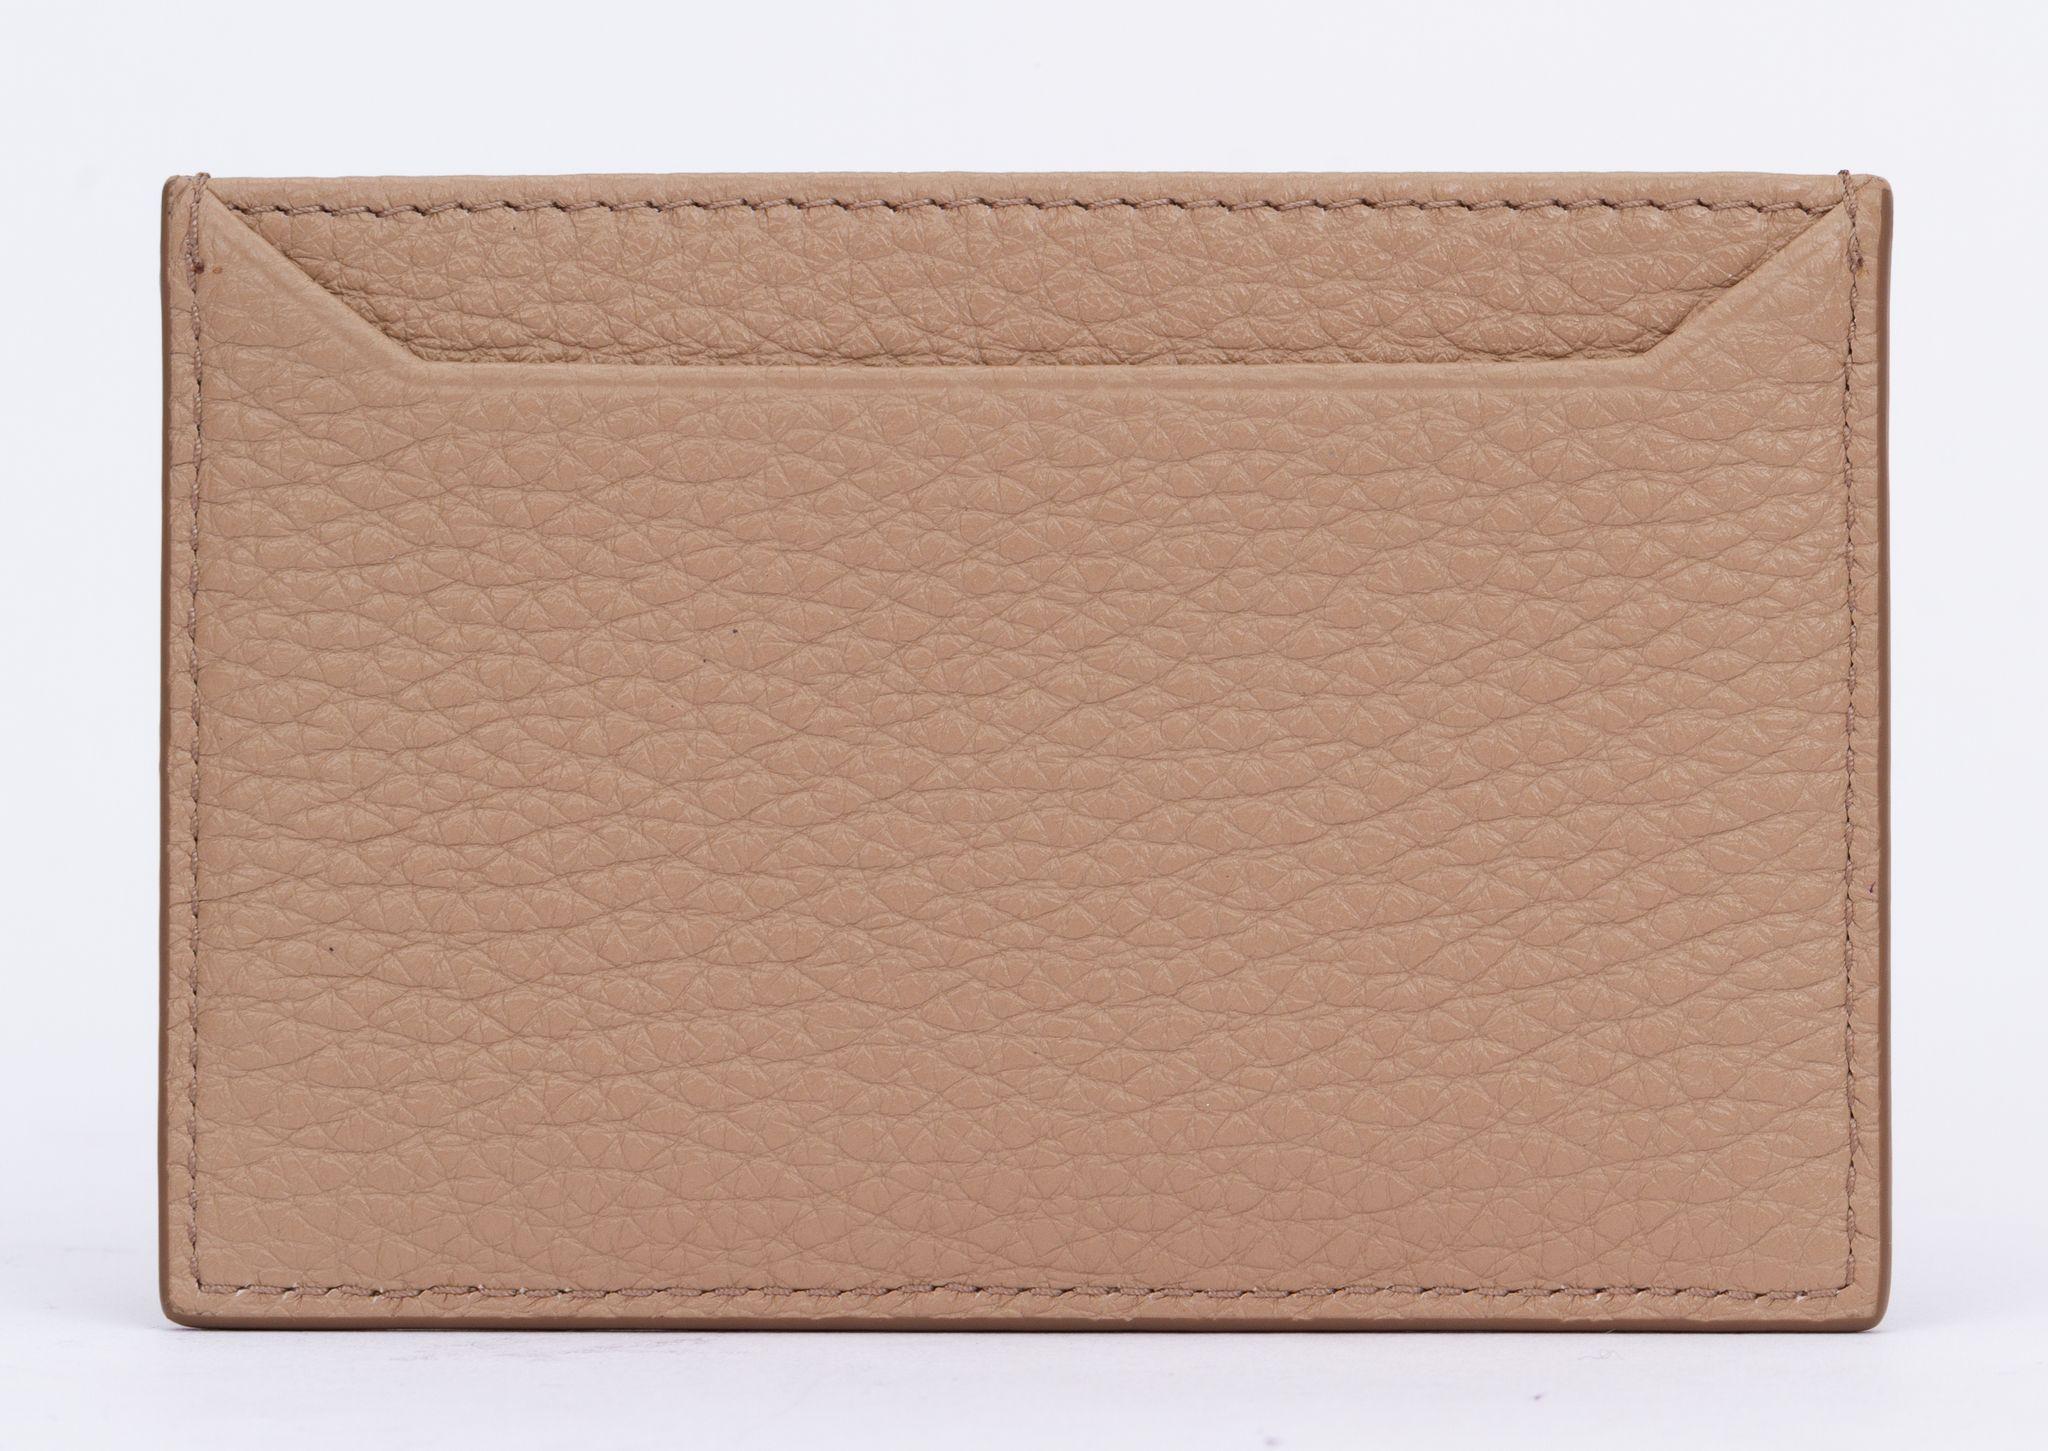 Prada Card Holder in Beige. This slim, stylish calf leather credit card holder offers three compartments with a contrasting color lining. Its chic gold-finish hardware pairs with a metal lettering logo to finish. It is brand new and comes with the